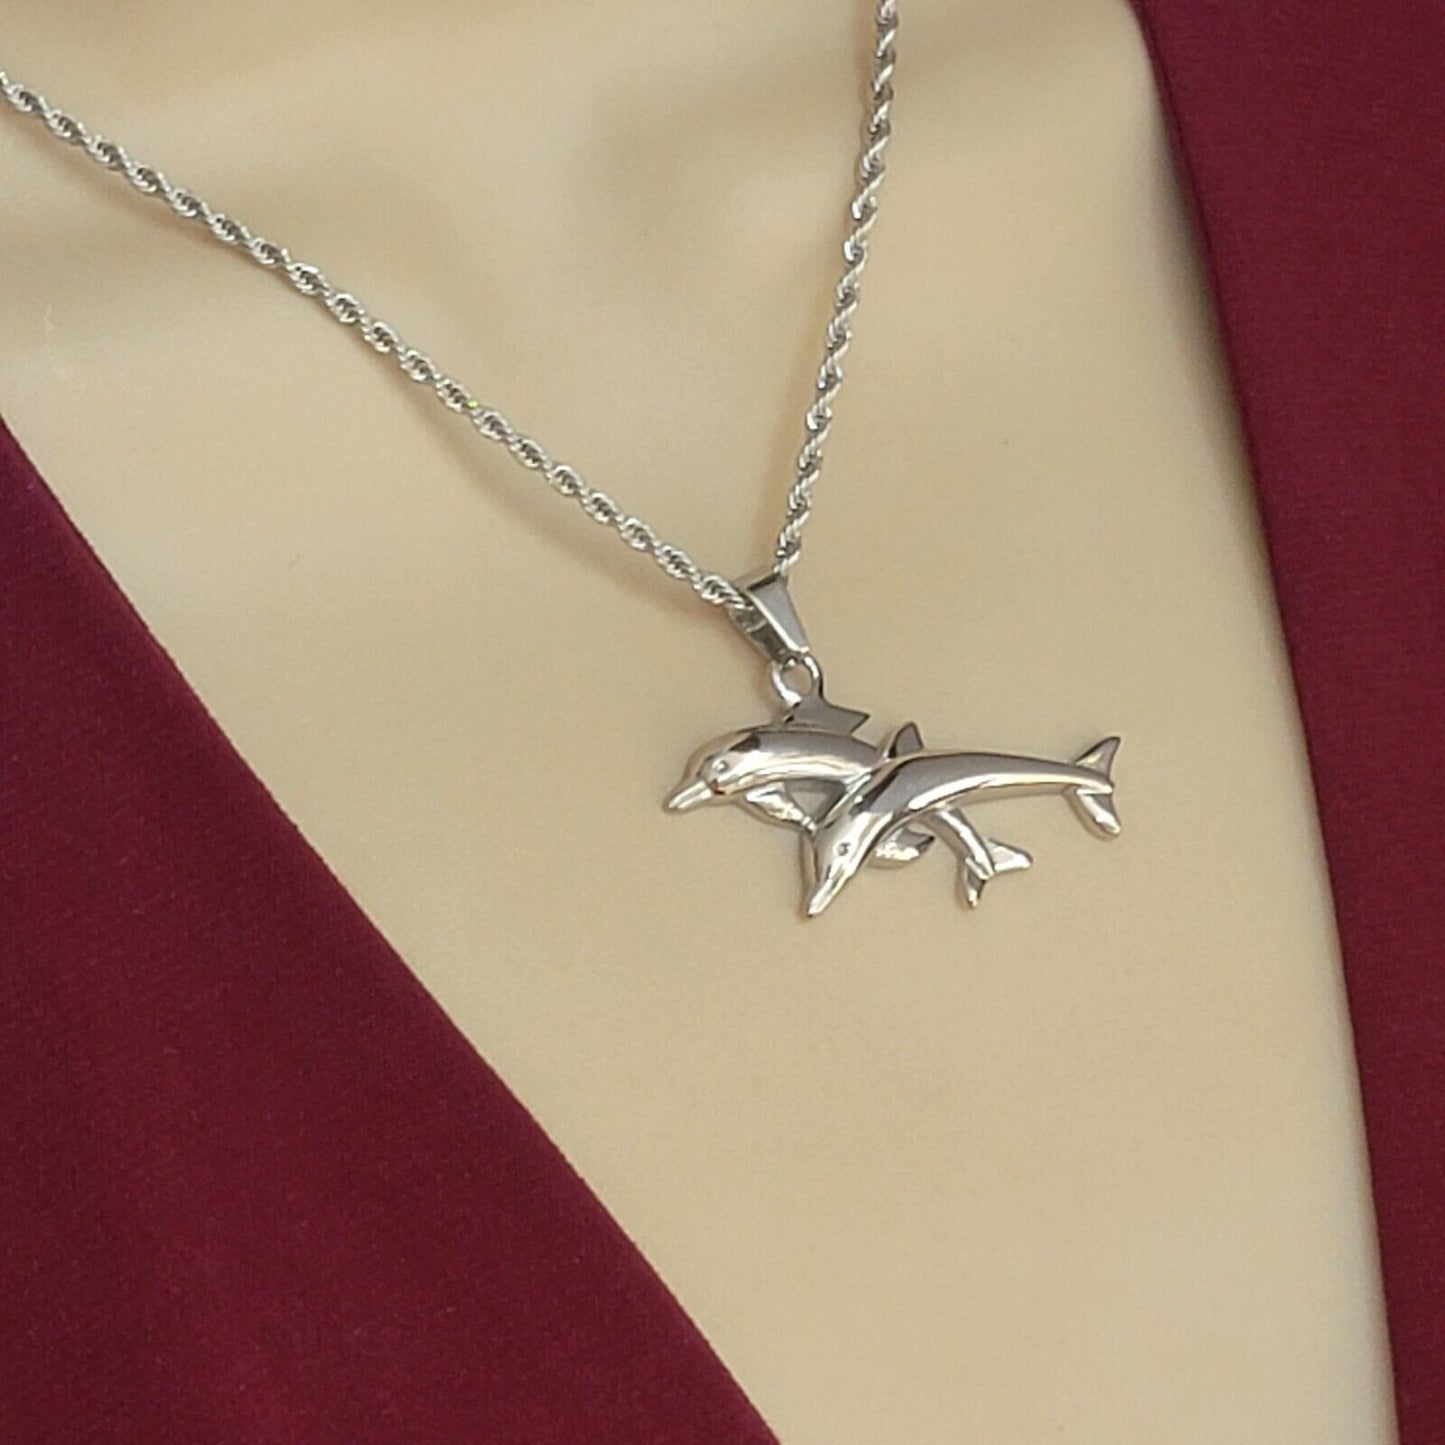 Necklaces - Stainless Steel. Couple Dolphin Pendant & Chain.